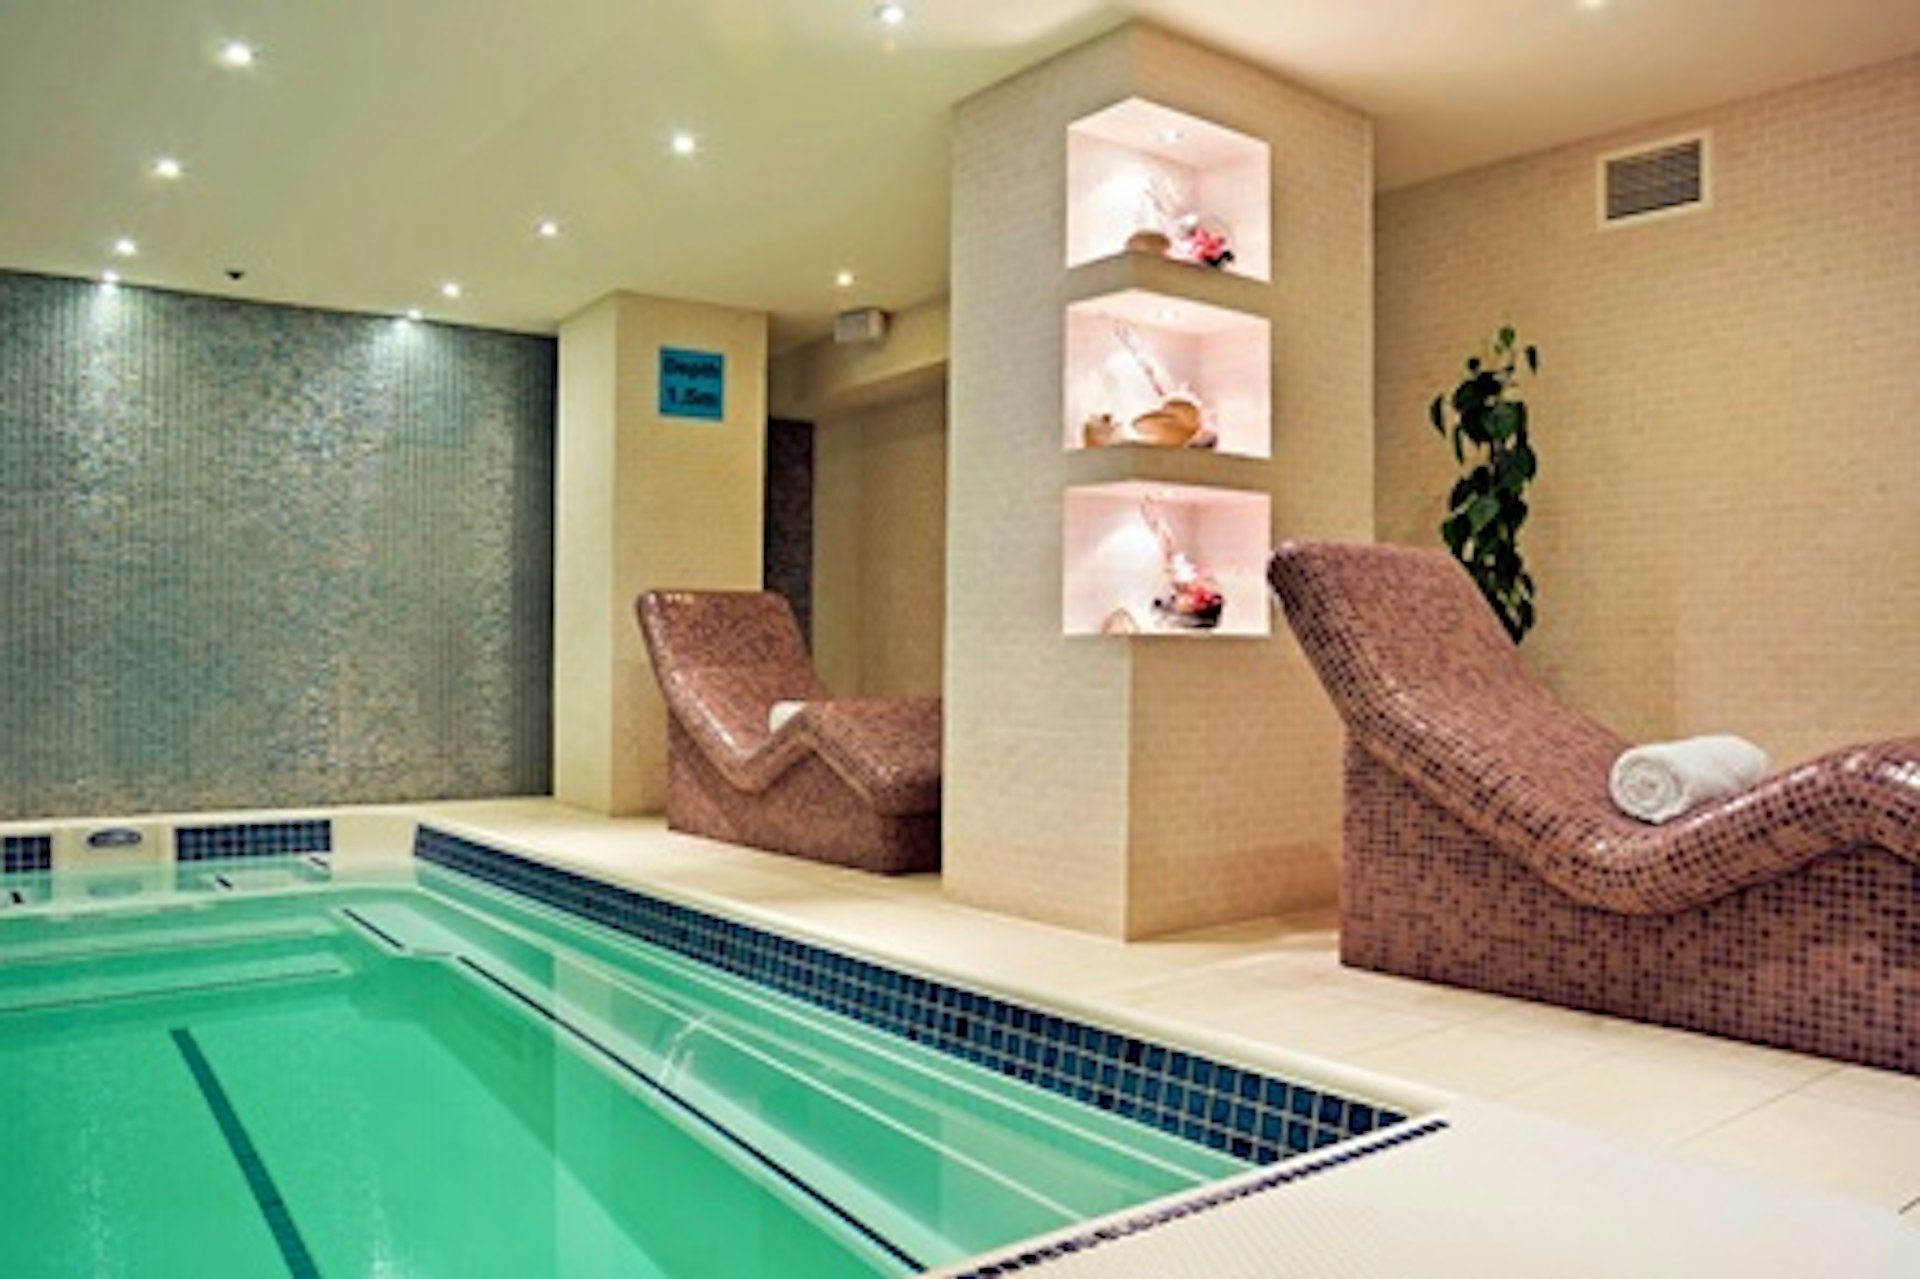 Weekend Spa Relaxation with Treatment and Prosecco for Two at the 5* Montcalm Hotel, London 1